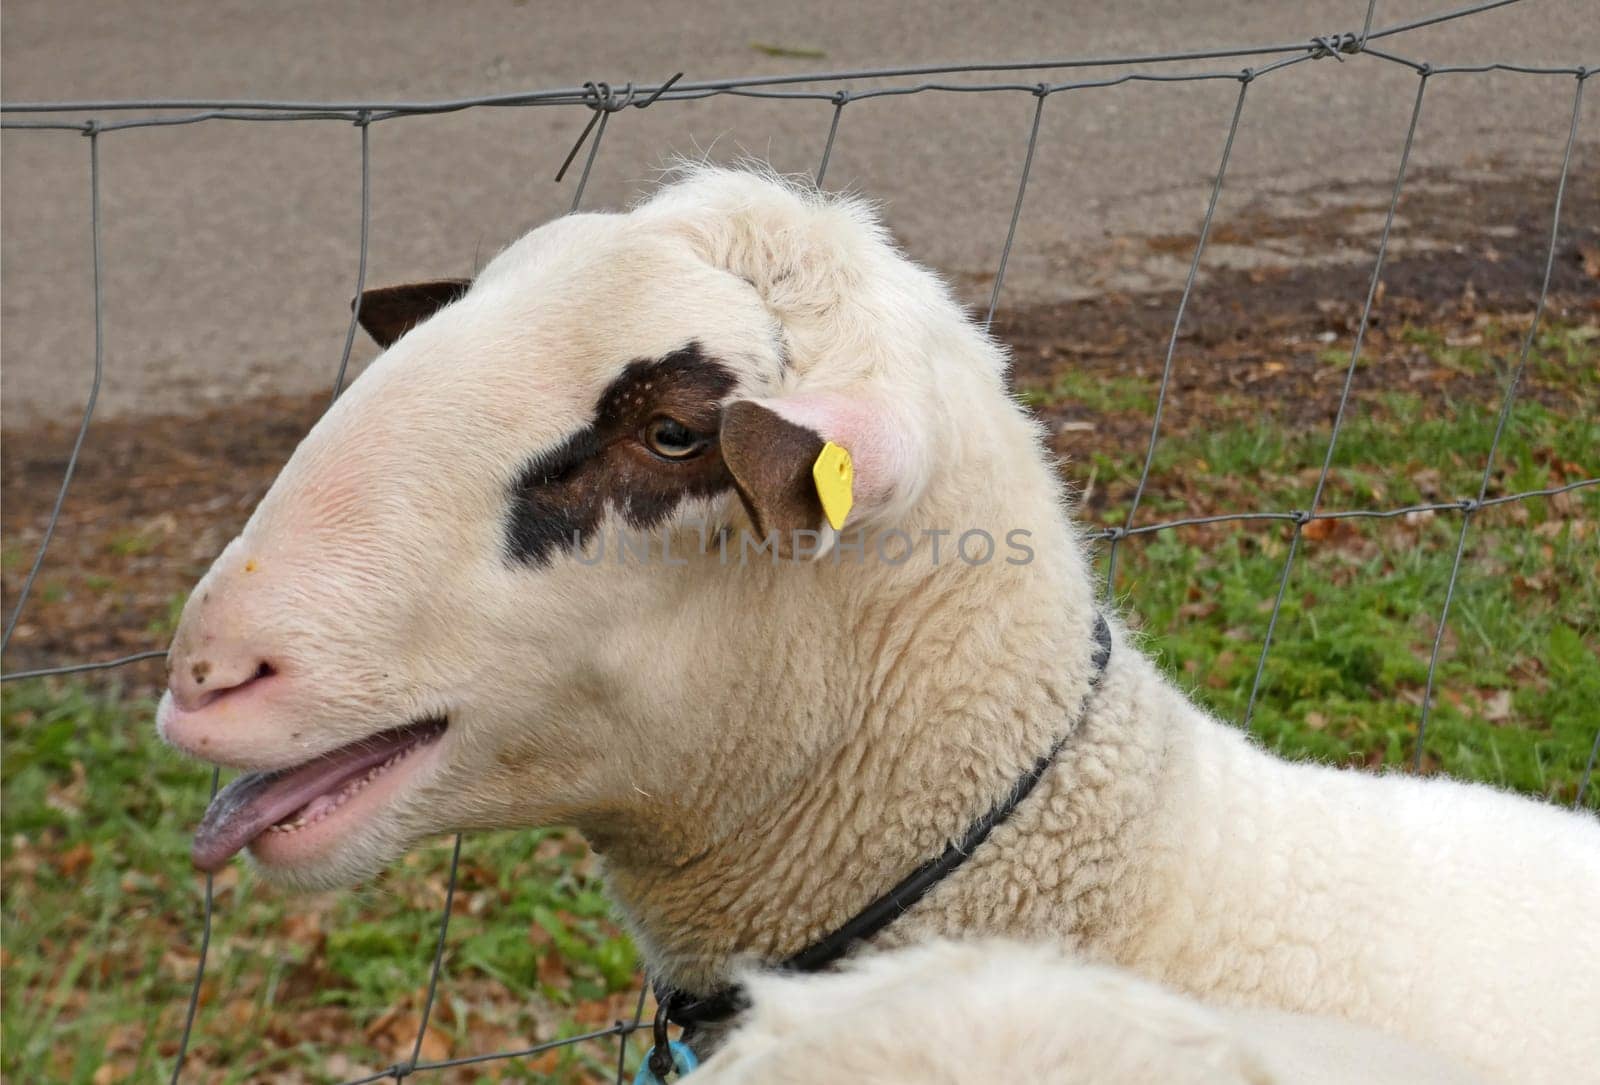 A bleating white sheep. It is of a special local breed: Landrace of Bentheim